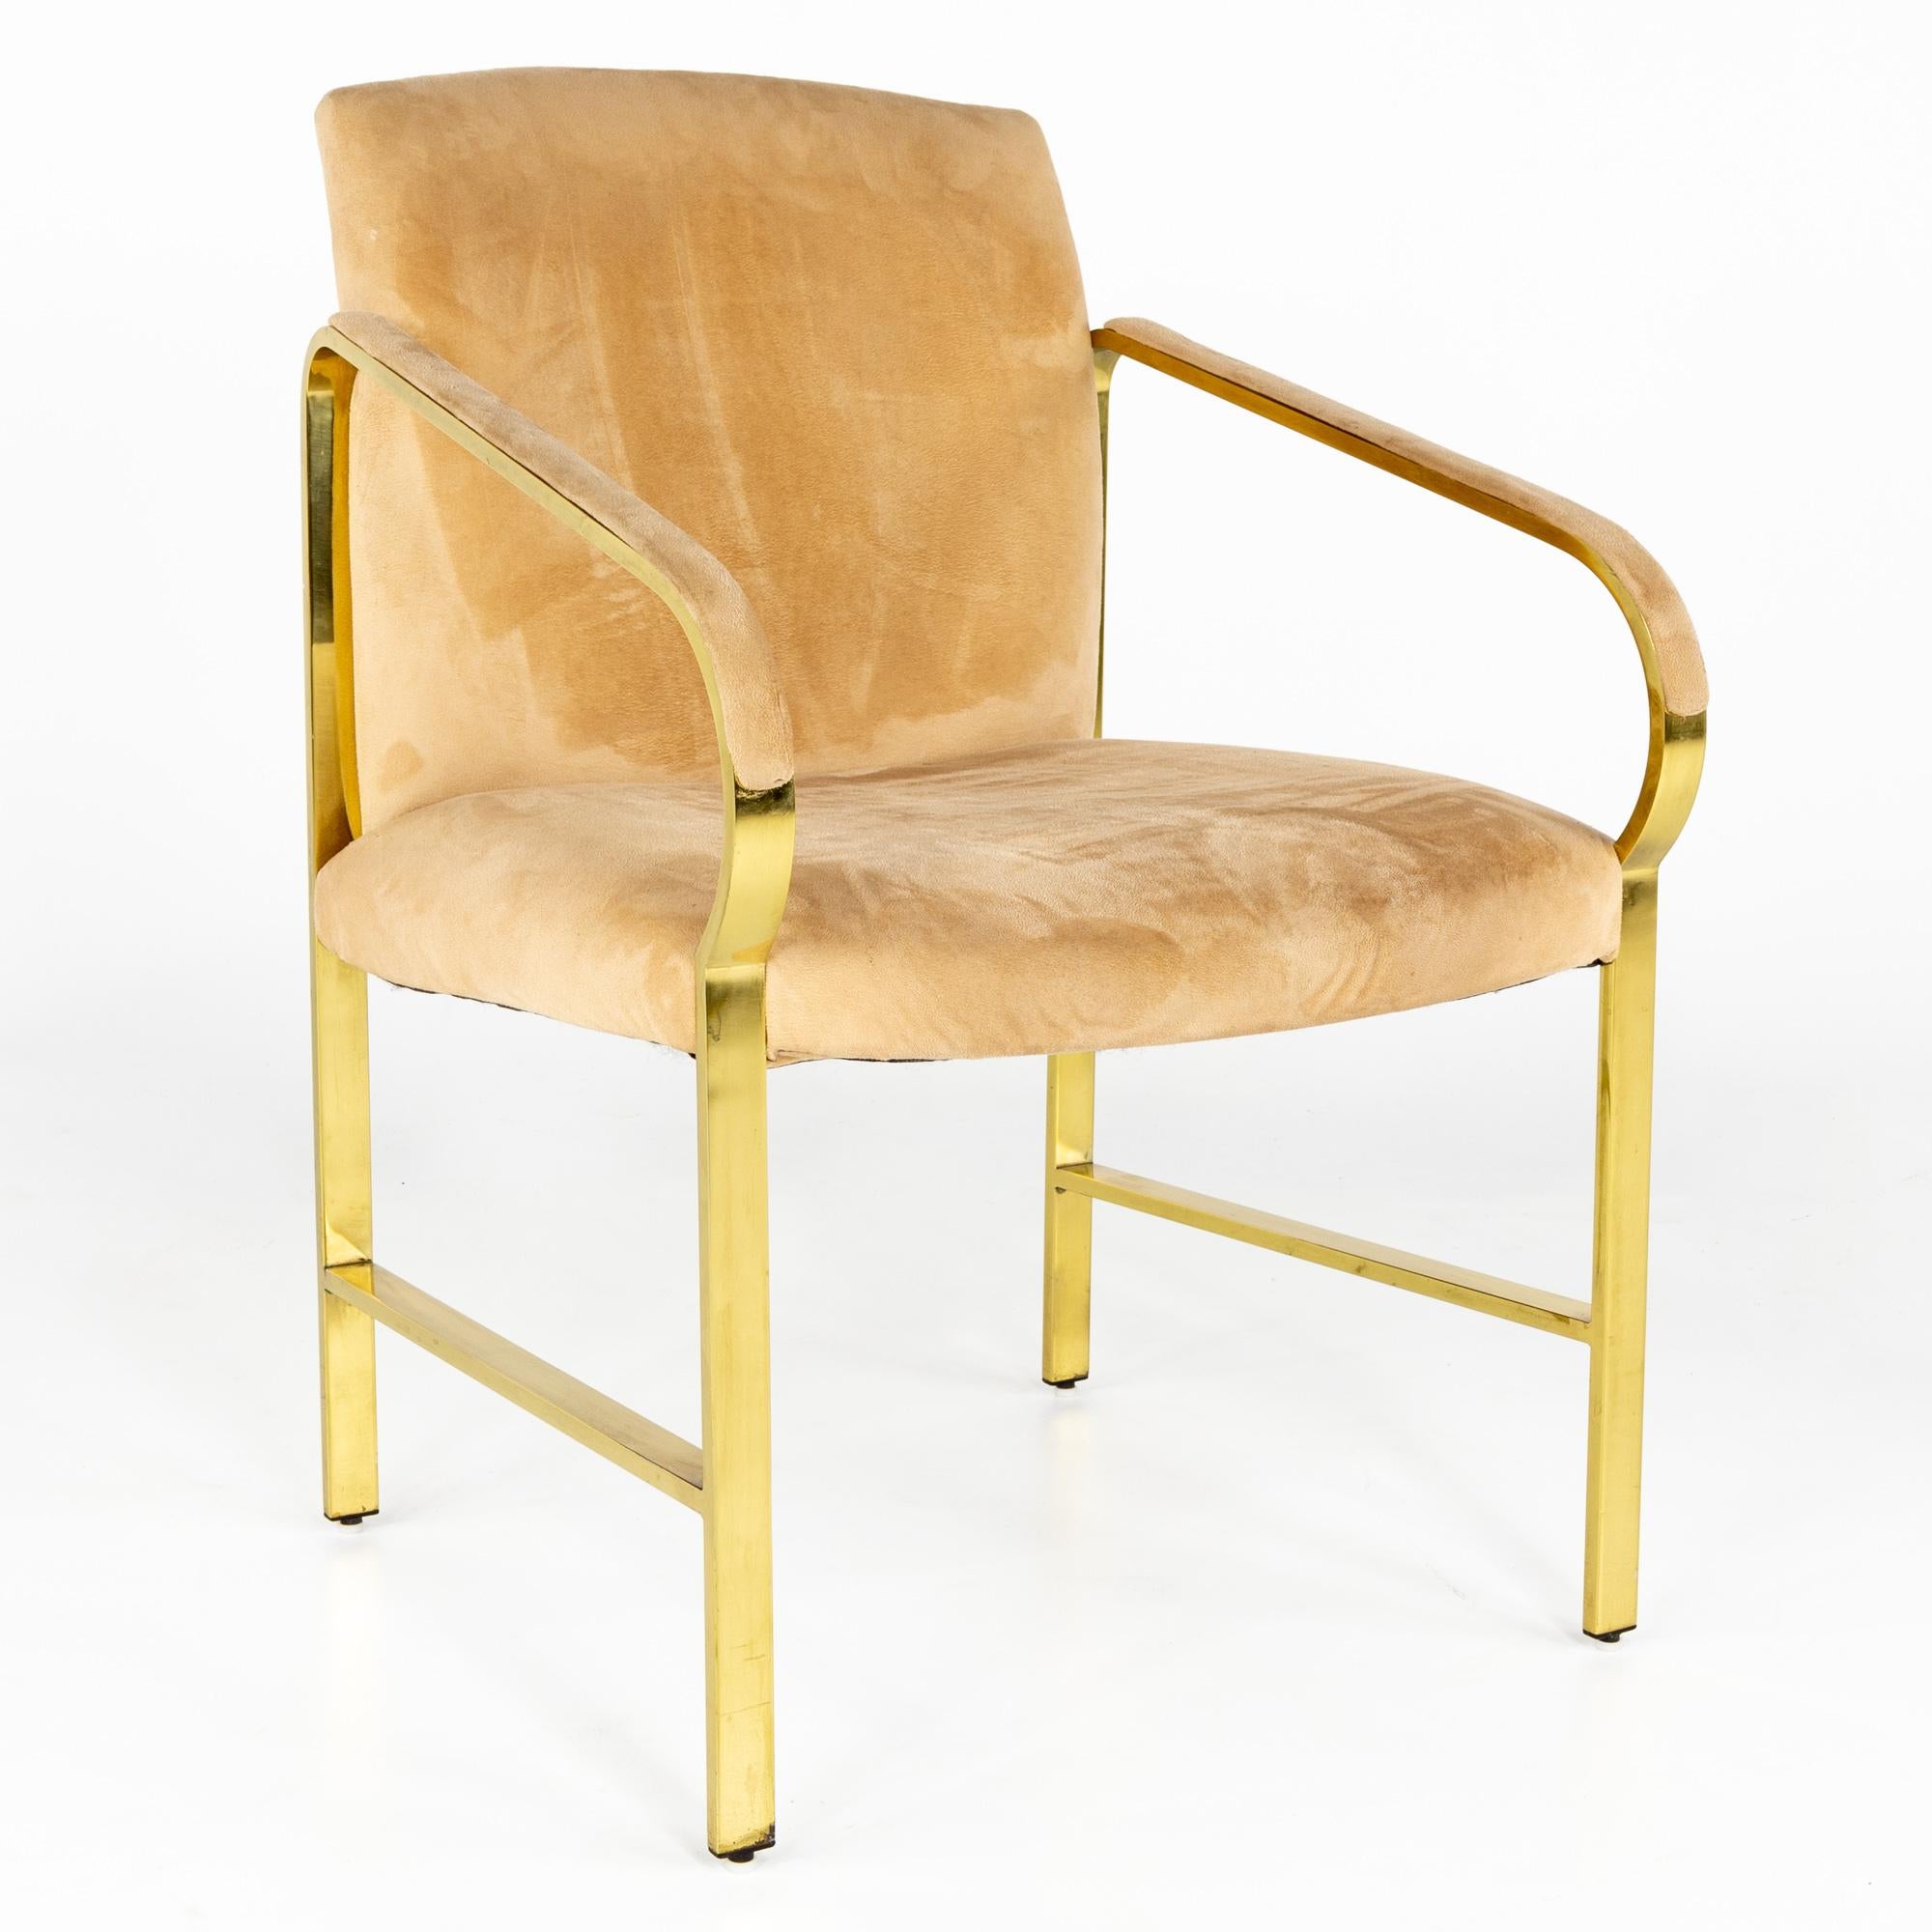 American Baker Furniture Mid Century Brass Arm Chairs, a Pair For Sale